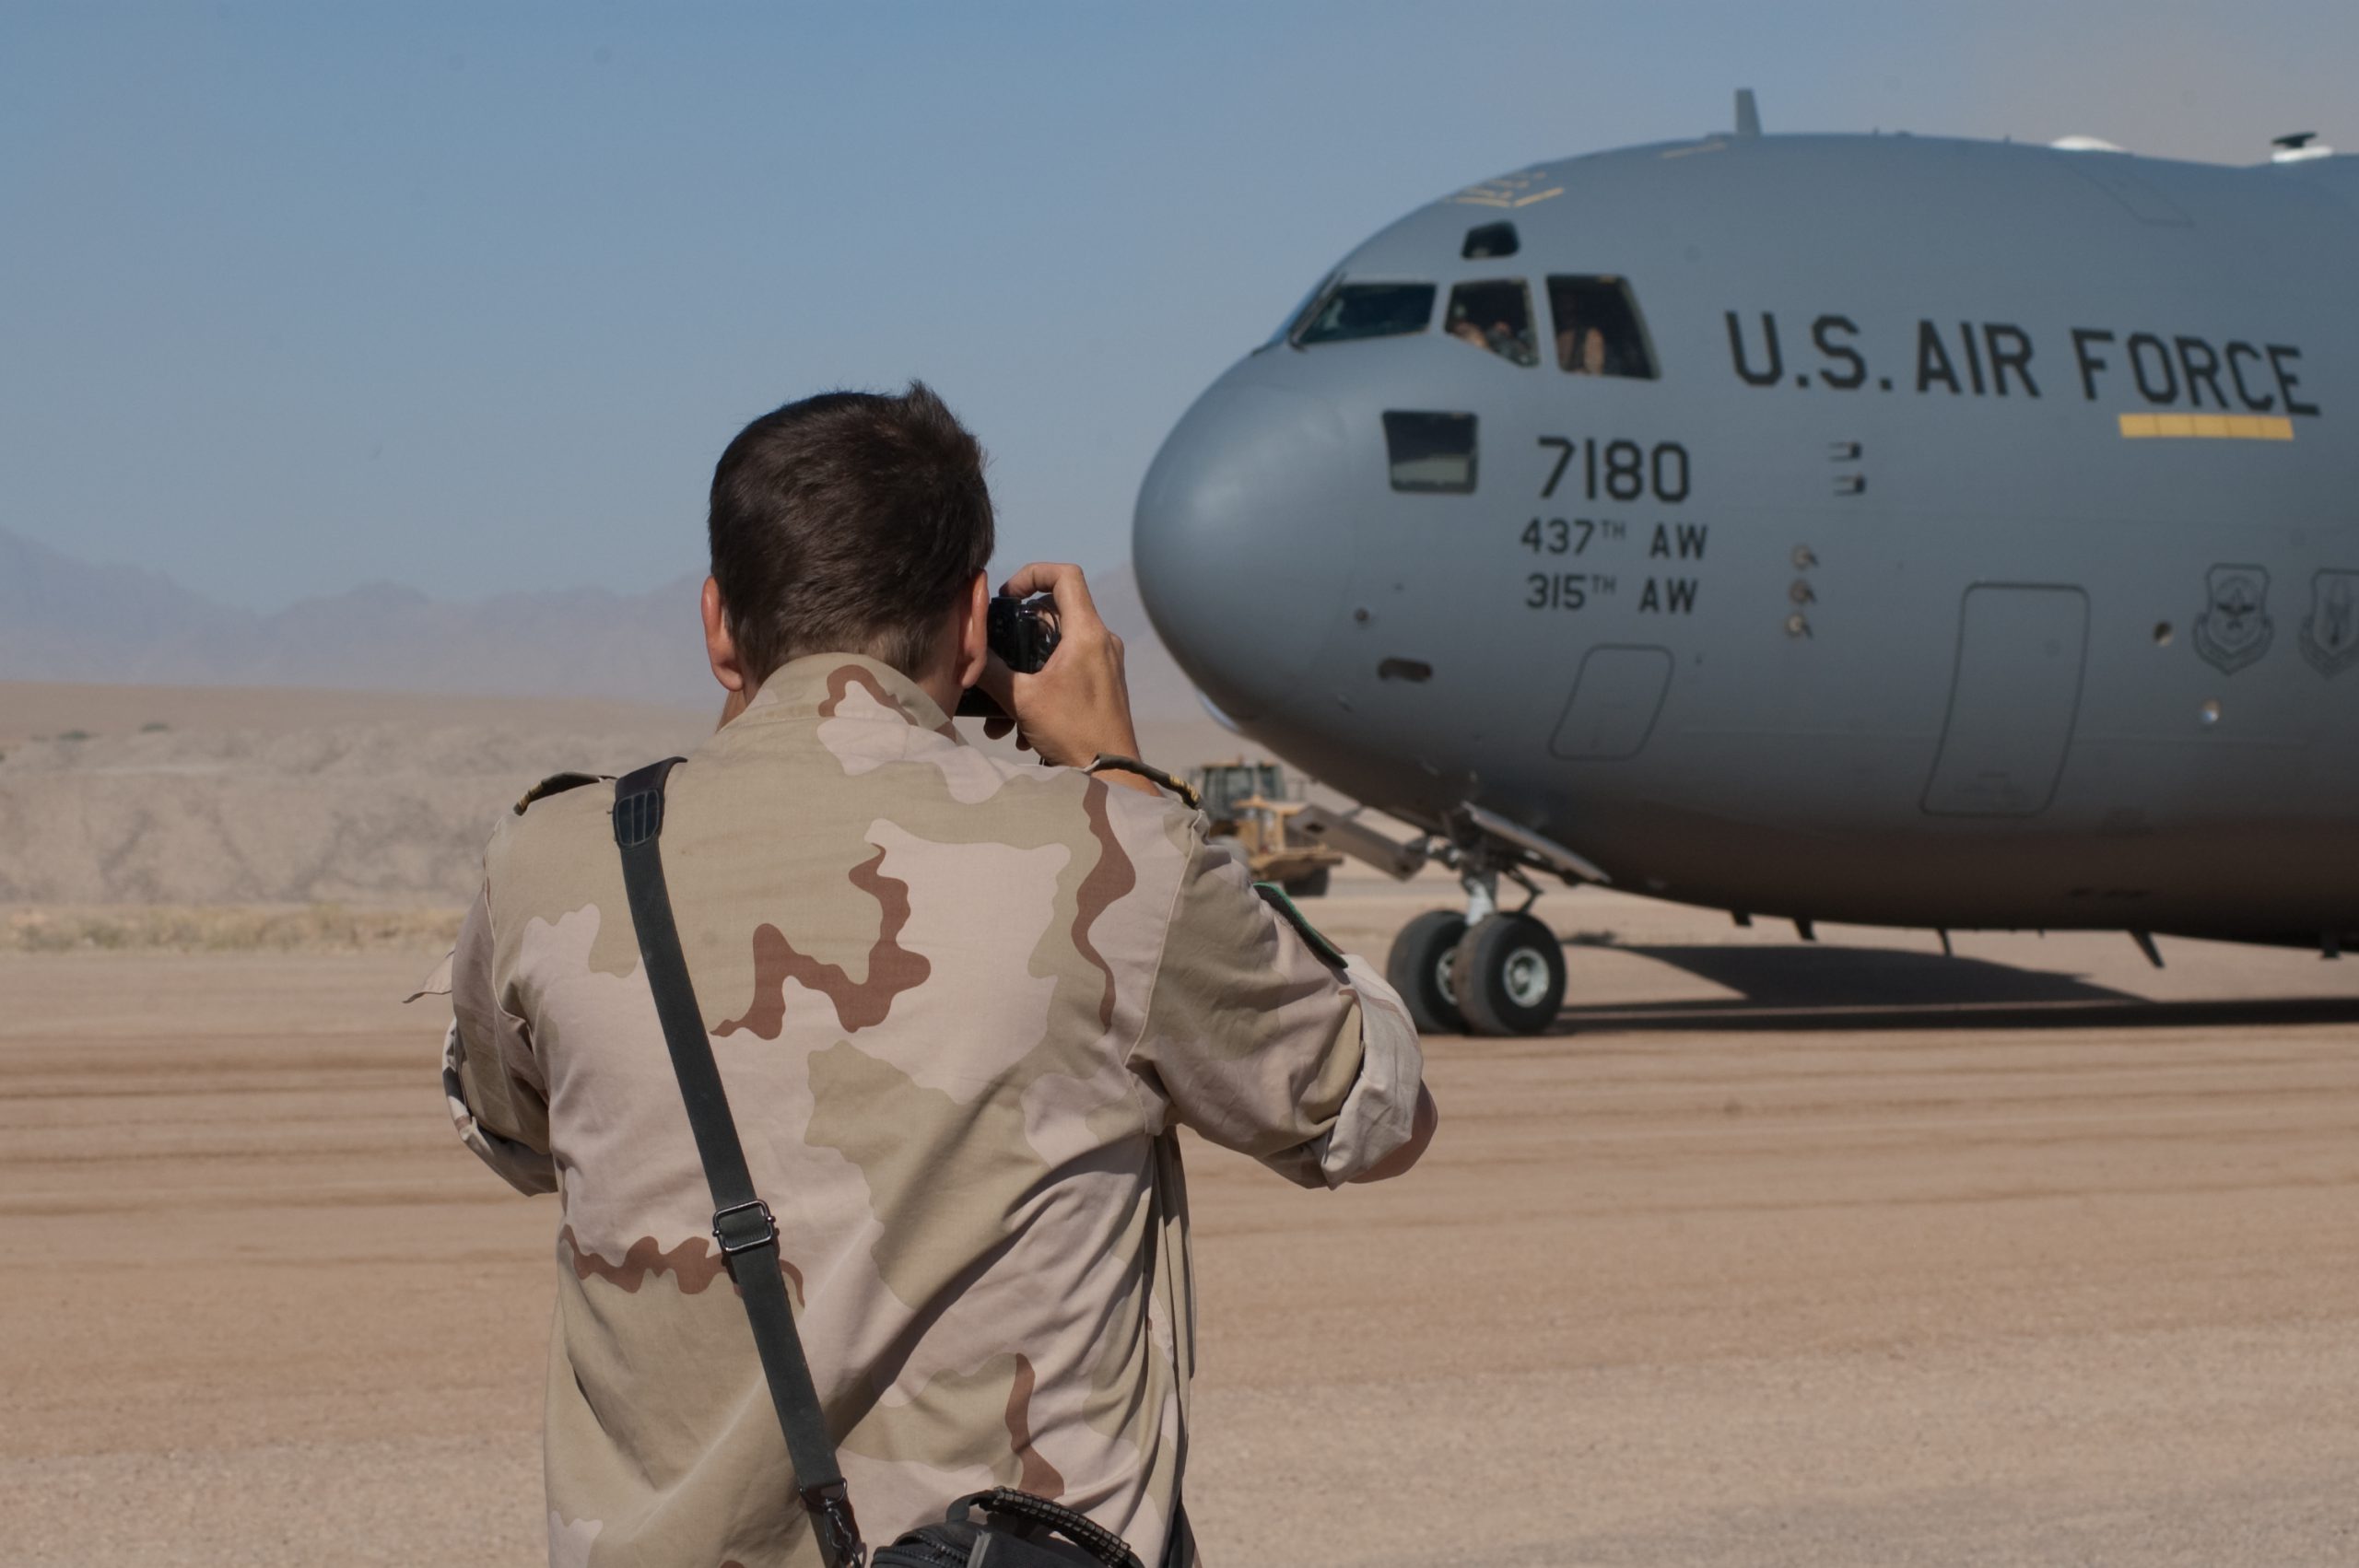 militair taking picture of cargo plane u.s. air force